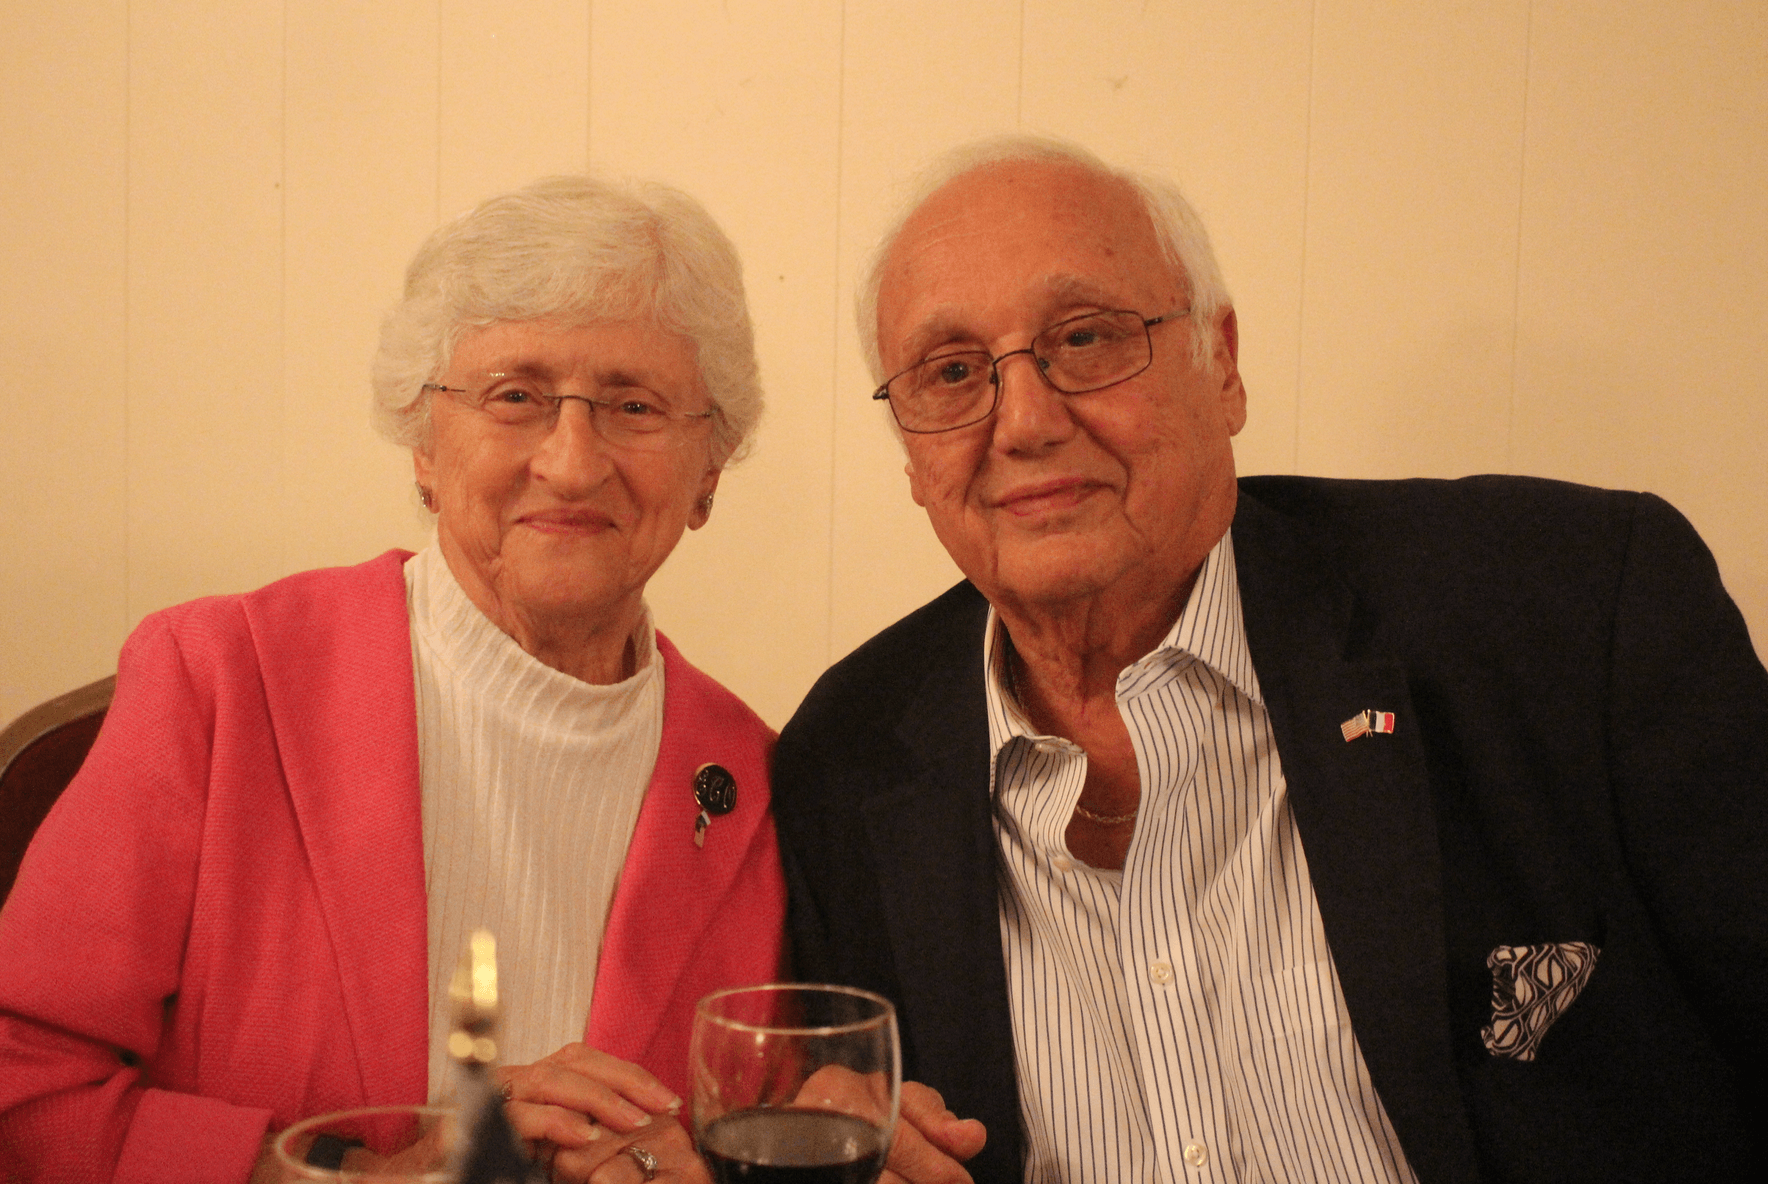 Past Columbus Day honoree Peter Orrico and Eleanor Orrico at St. Lawrence Club, Oct 9, 2017 Photo: Leslie Yager